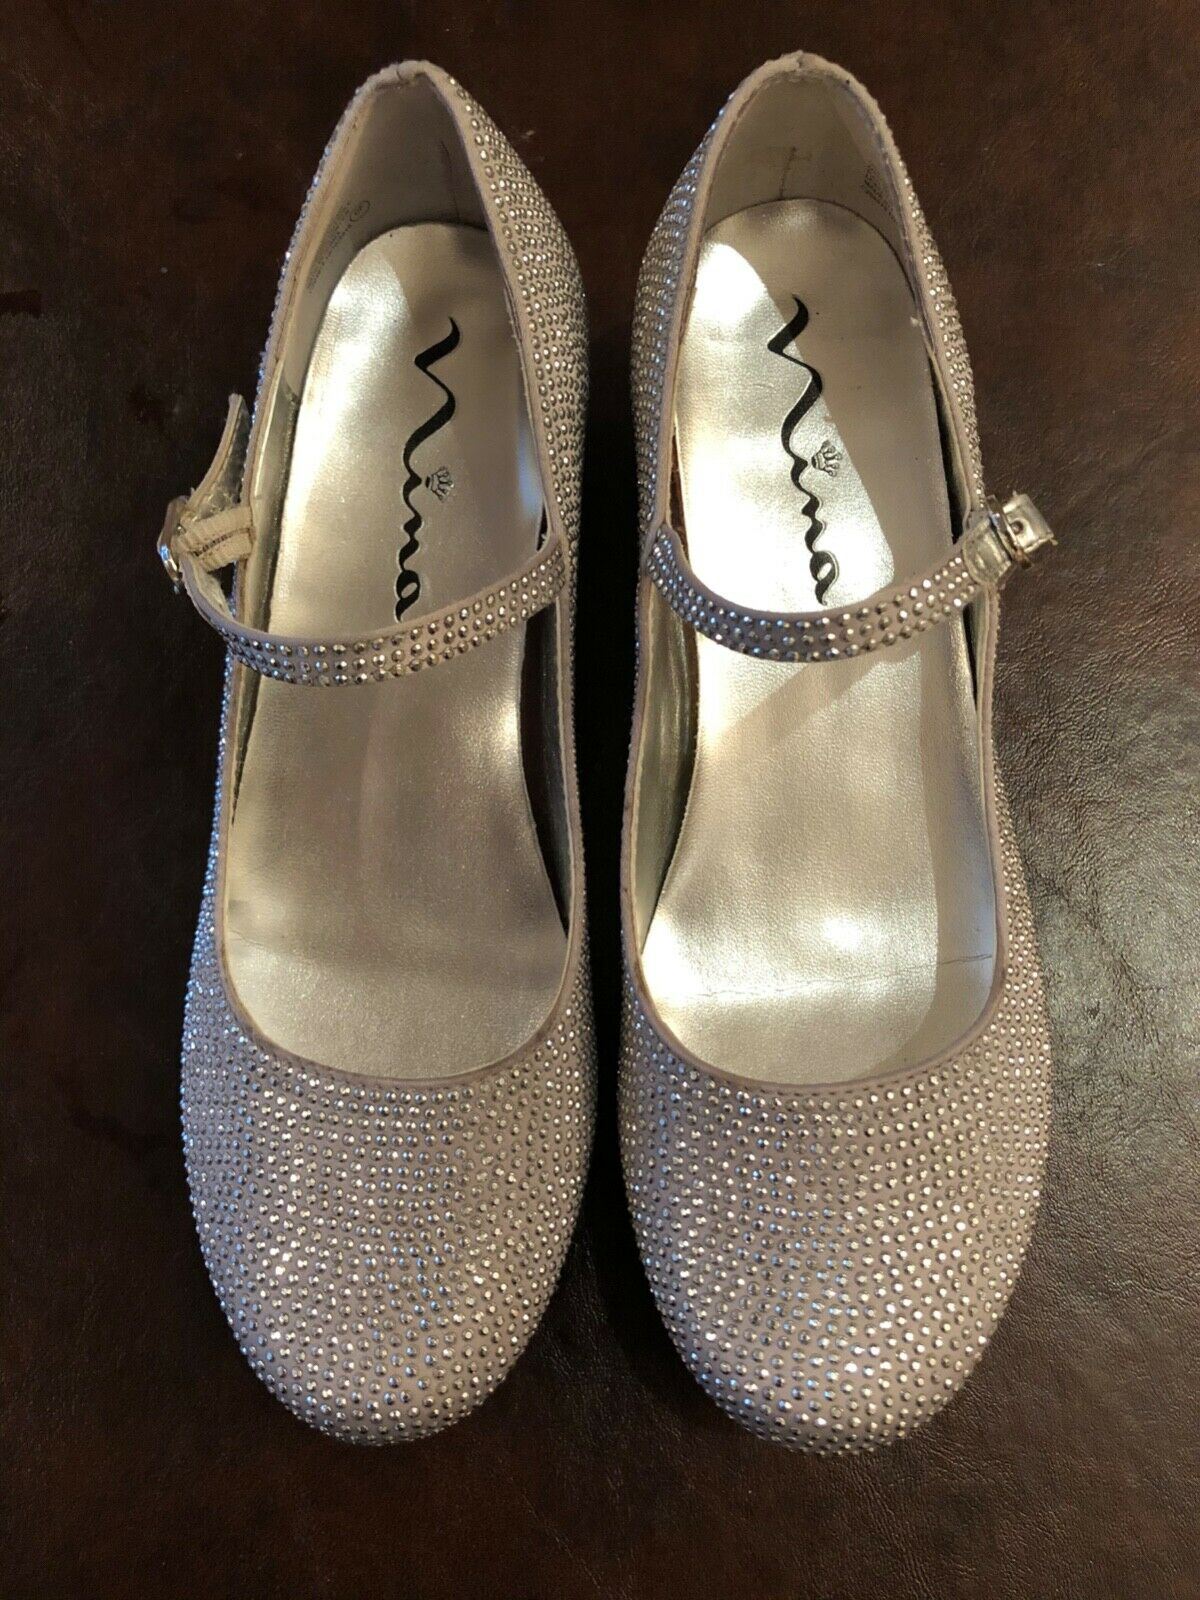 Girls Silver Metallic w/Studs & Buckle Dress Shoes-Mary Jane Style-Youth Size 4